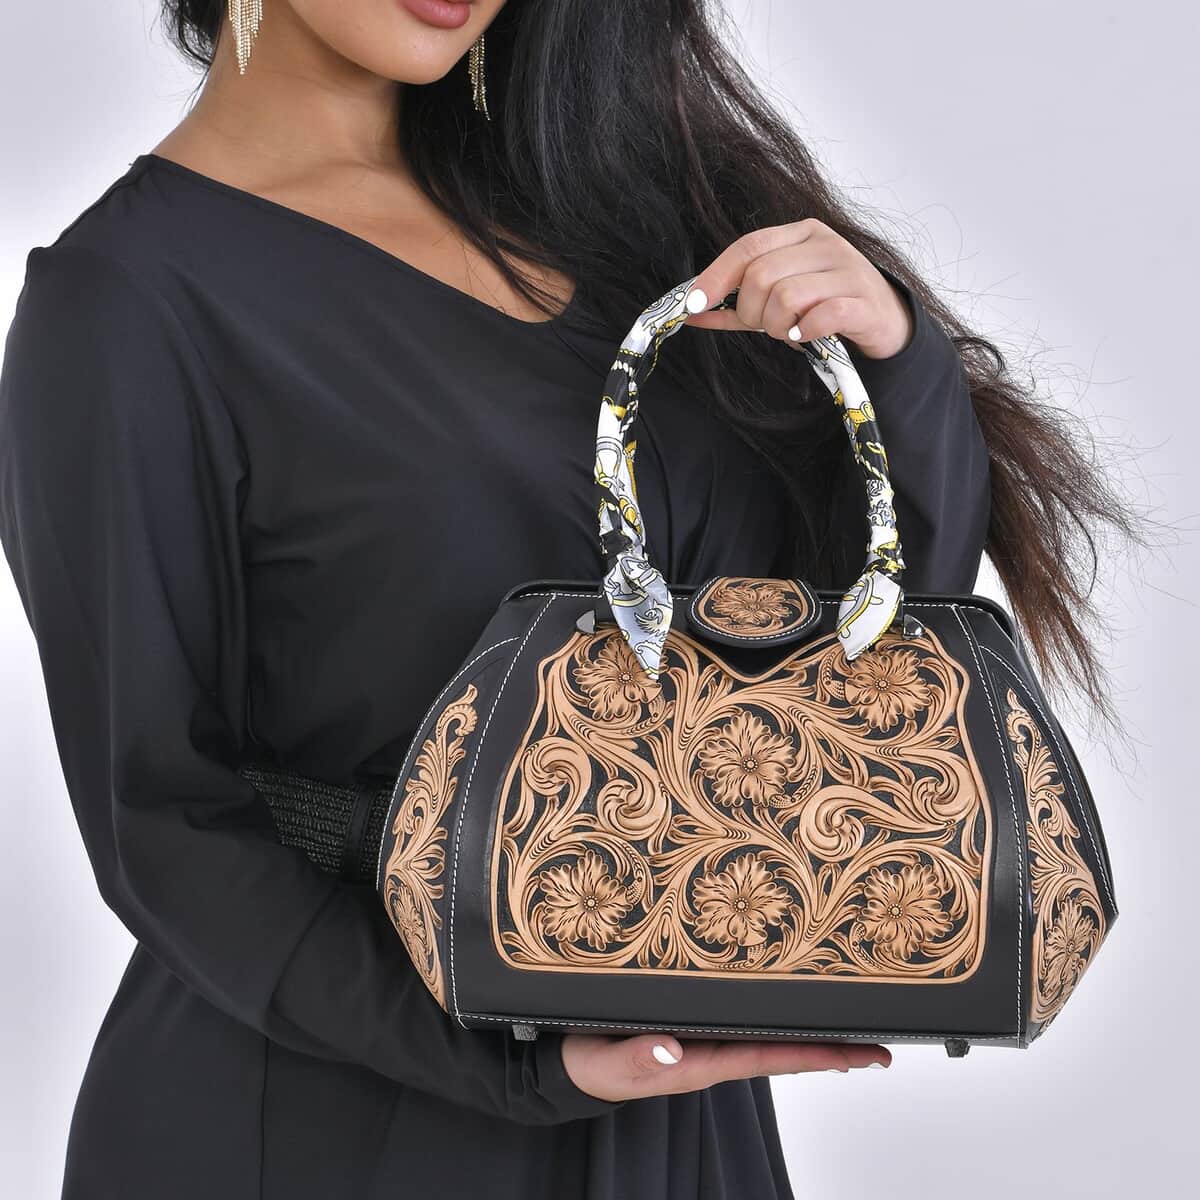 Grand Pelle Black with Solid Color Hand Engraving Flower Pattern Genuine Leather Crossbody Bag (14"x9"x7") image number 2